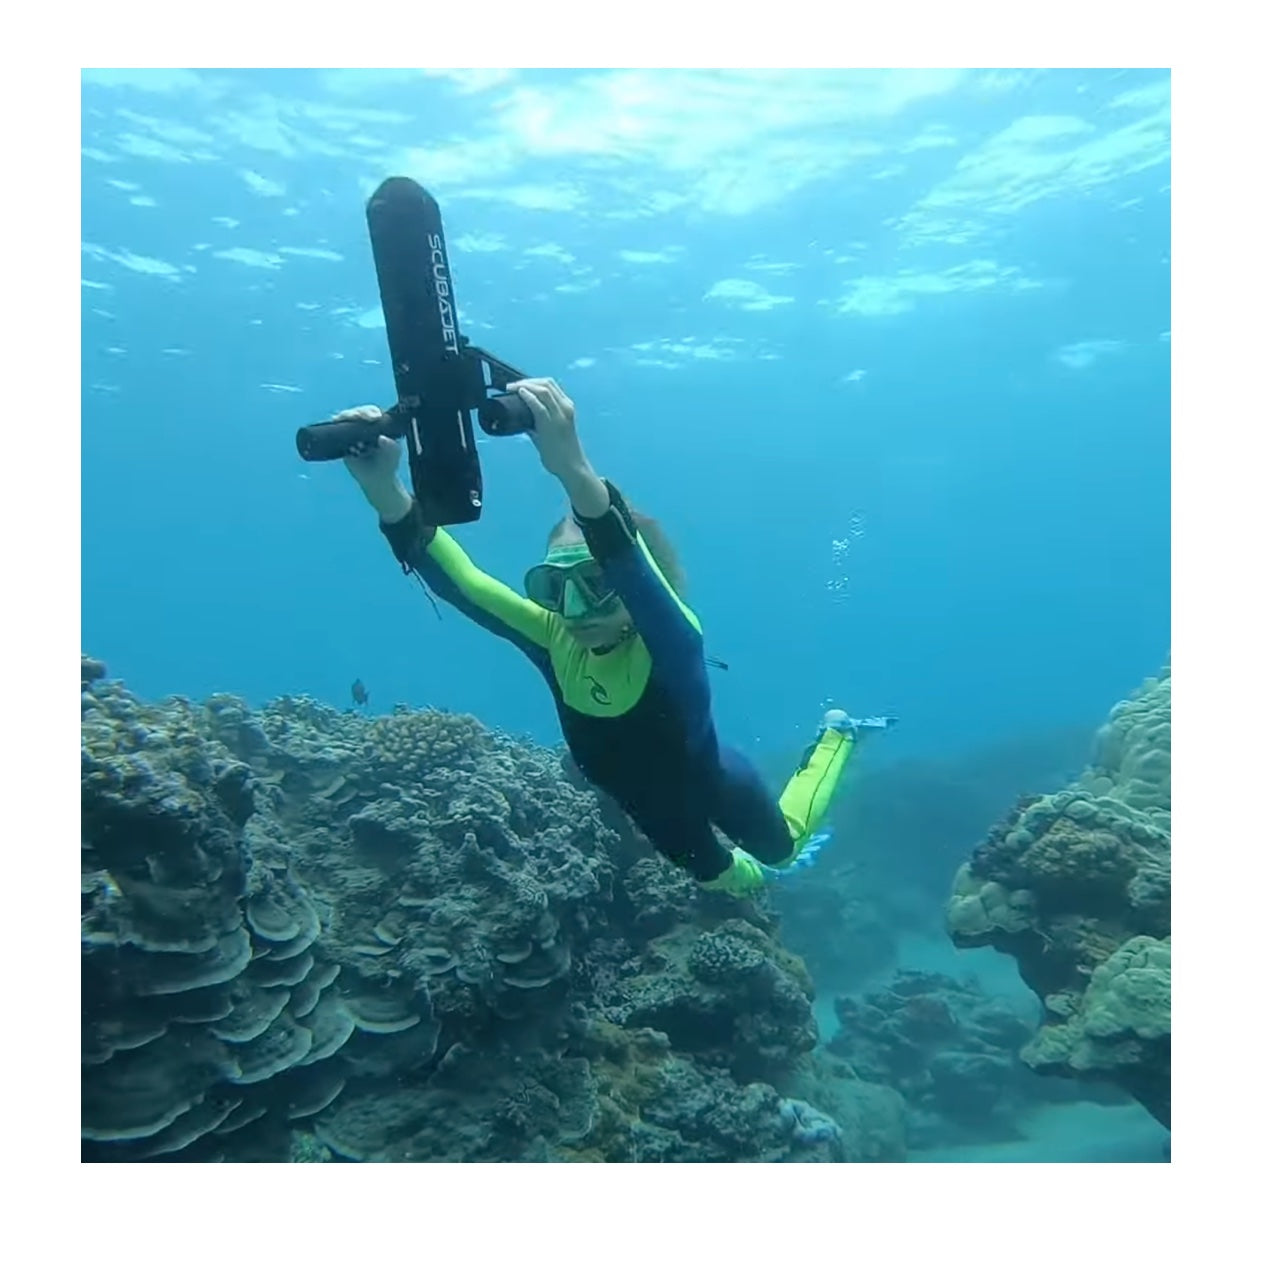 A young girl uses the ScubaJet Pro Underwater Scooter Kit while snorkeling. The ScubaJet Pro is pointed to the waters surface as she heads back up.